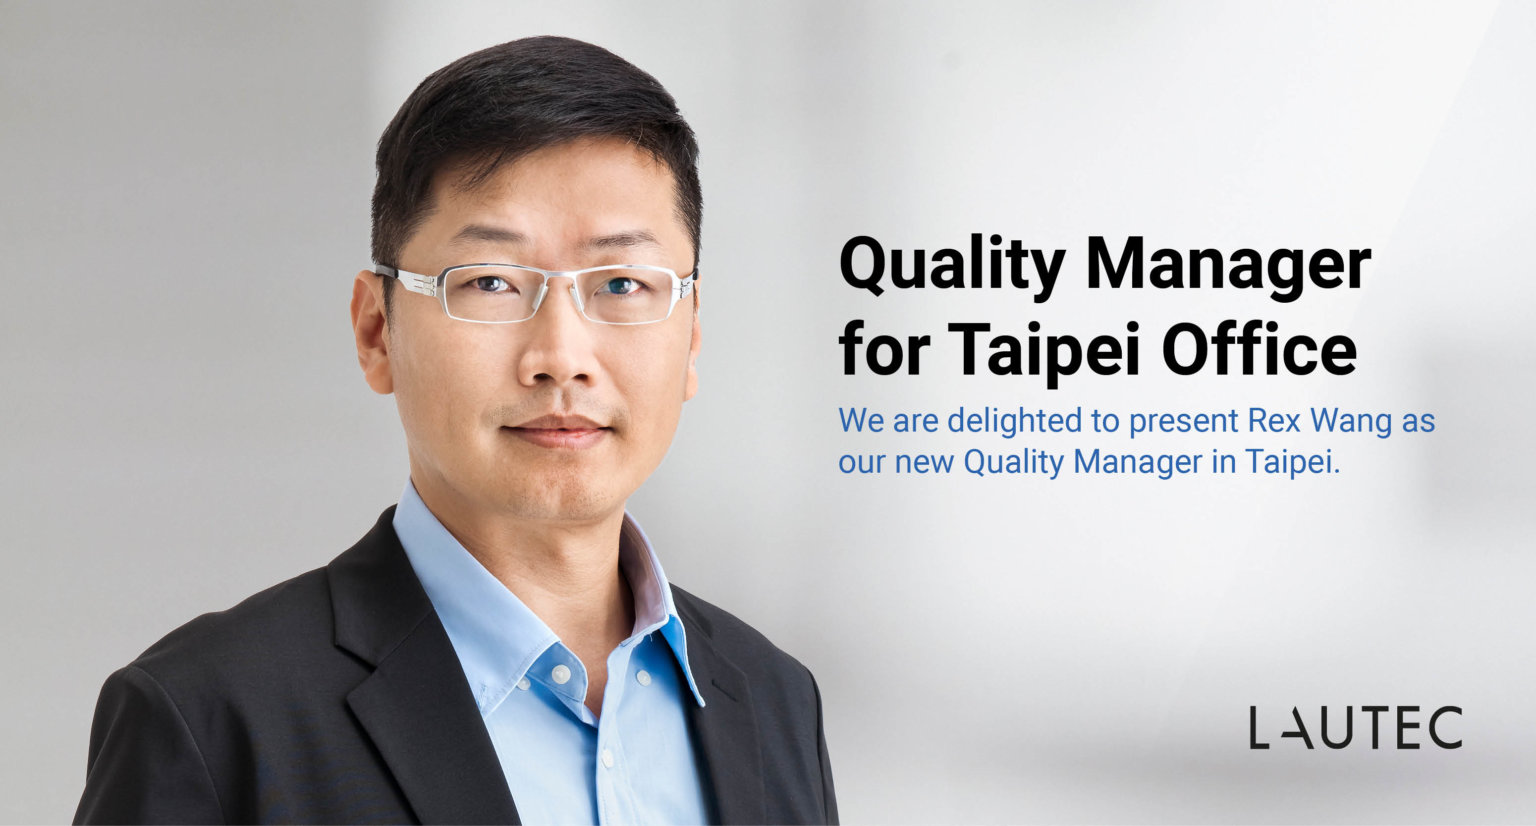 Quality Manager joins LAUTEC in Taiwan